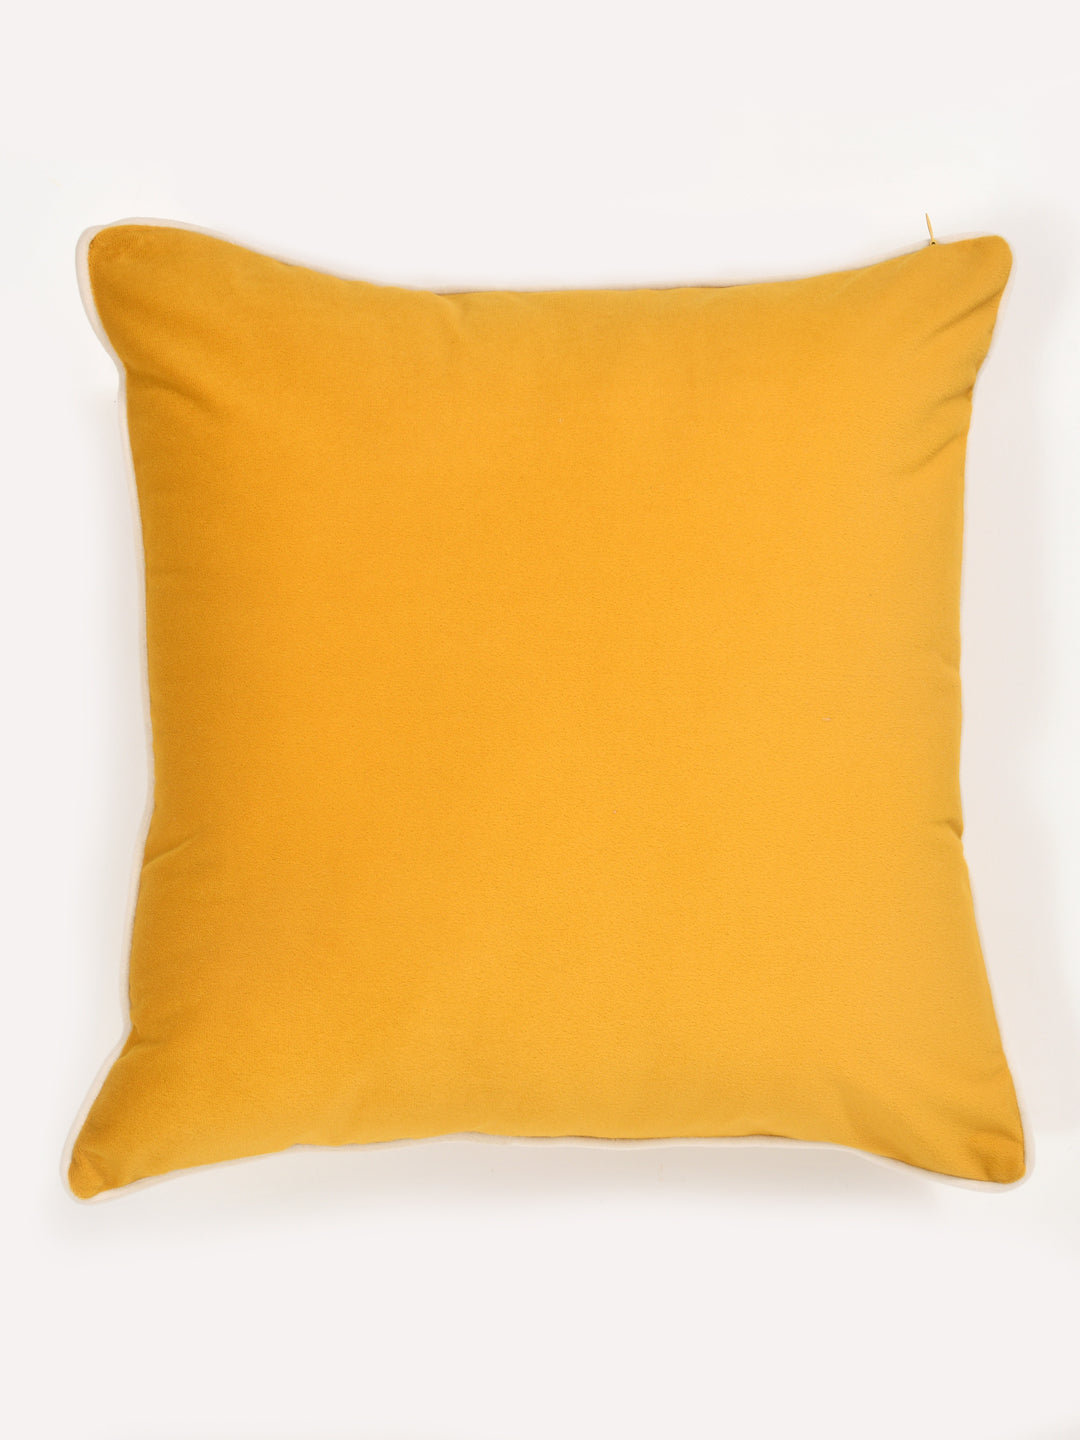 Velvet Cushion Covers; Set of 5; Amber Yellow With White Piping